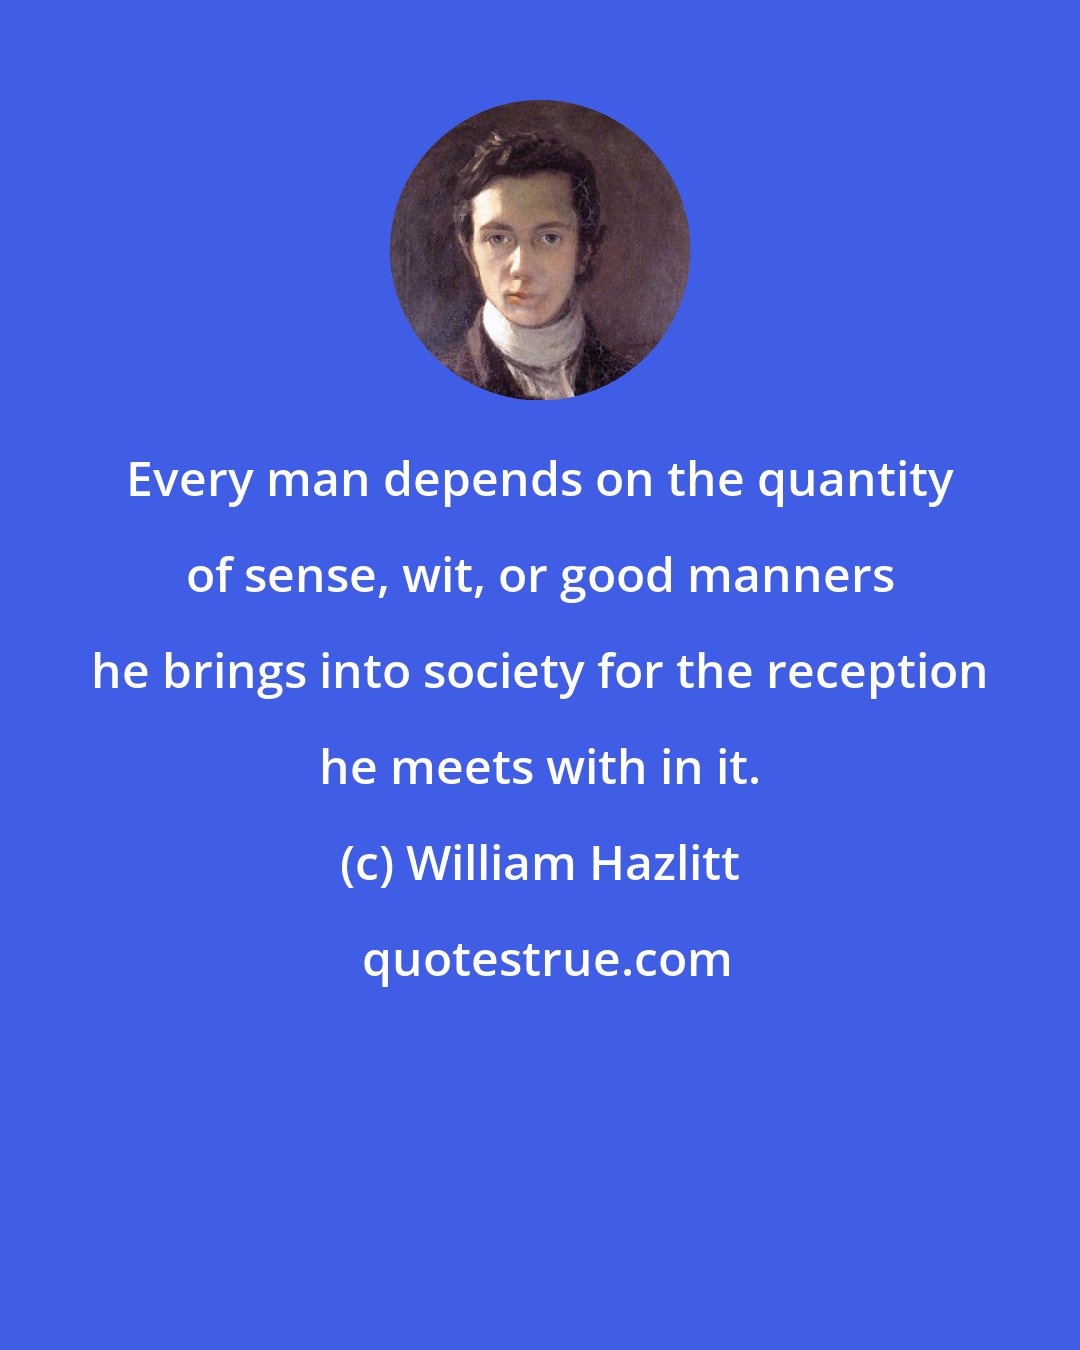 William Hazlitt: Every man depends on the quantity of sense, wit, or good manners he brings into society for the reception he meets with in it.